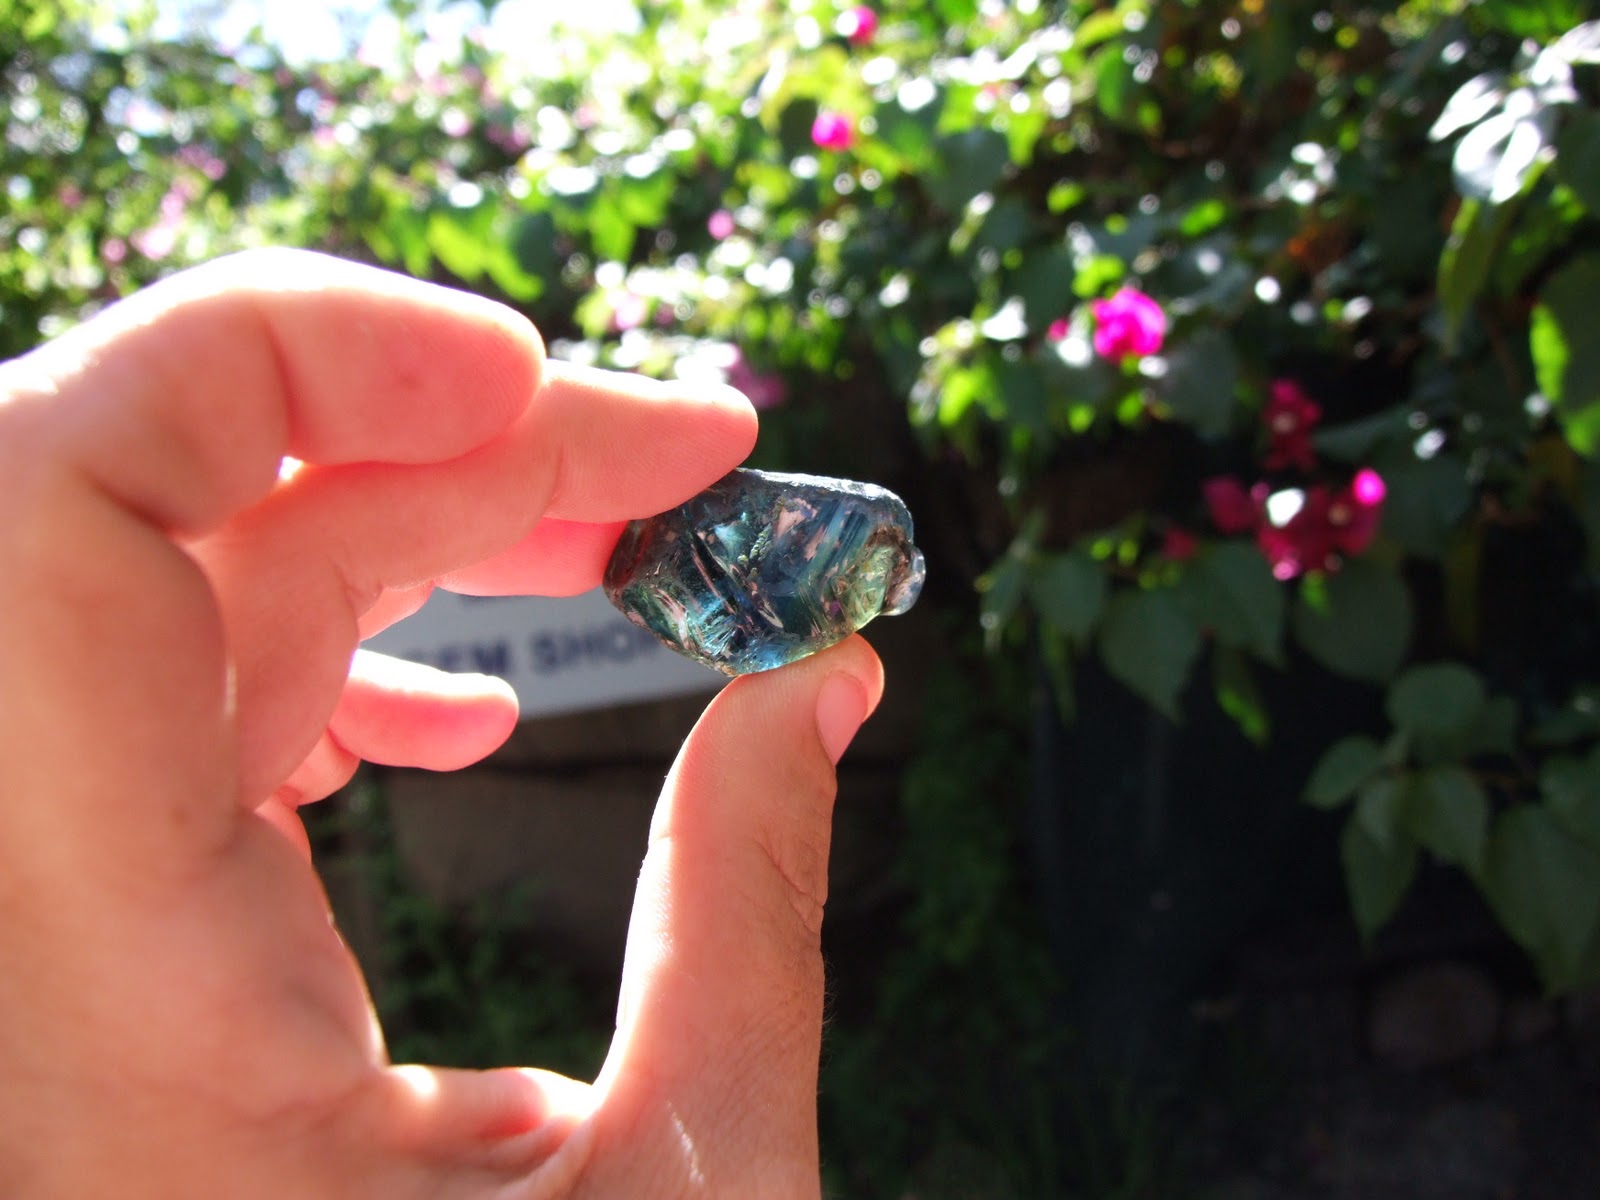 A gemstone held between thumb and forefinger, found in Queensland gemfields